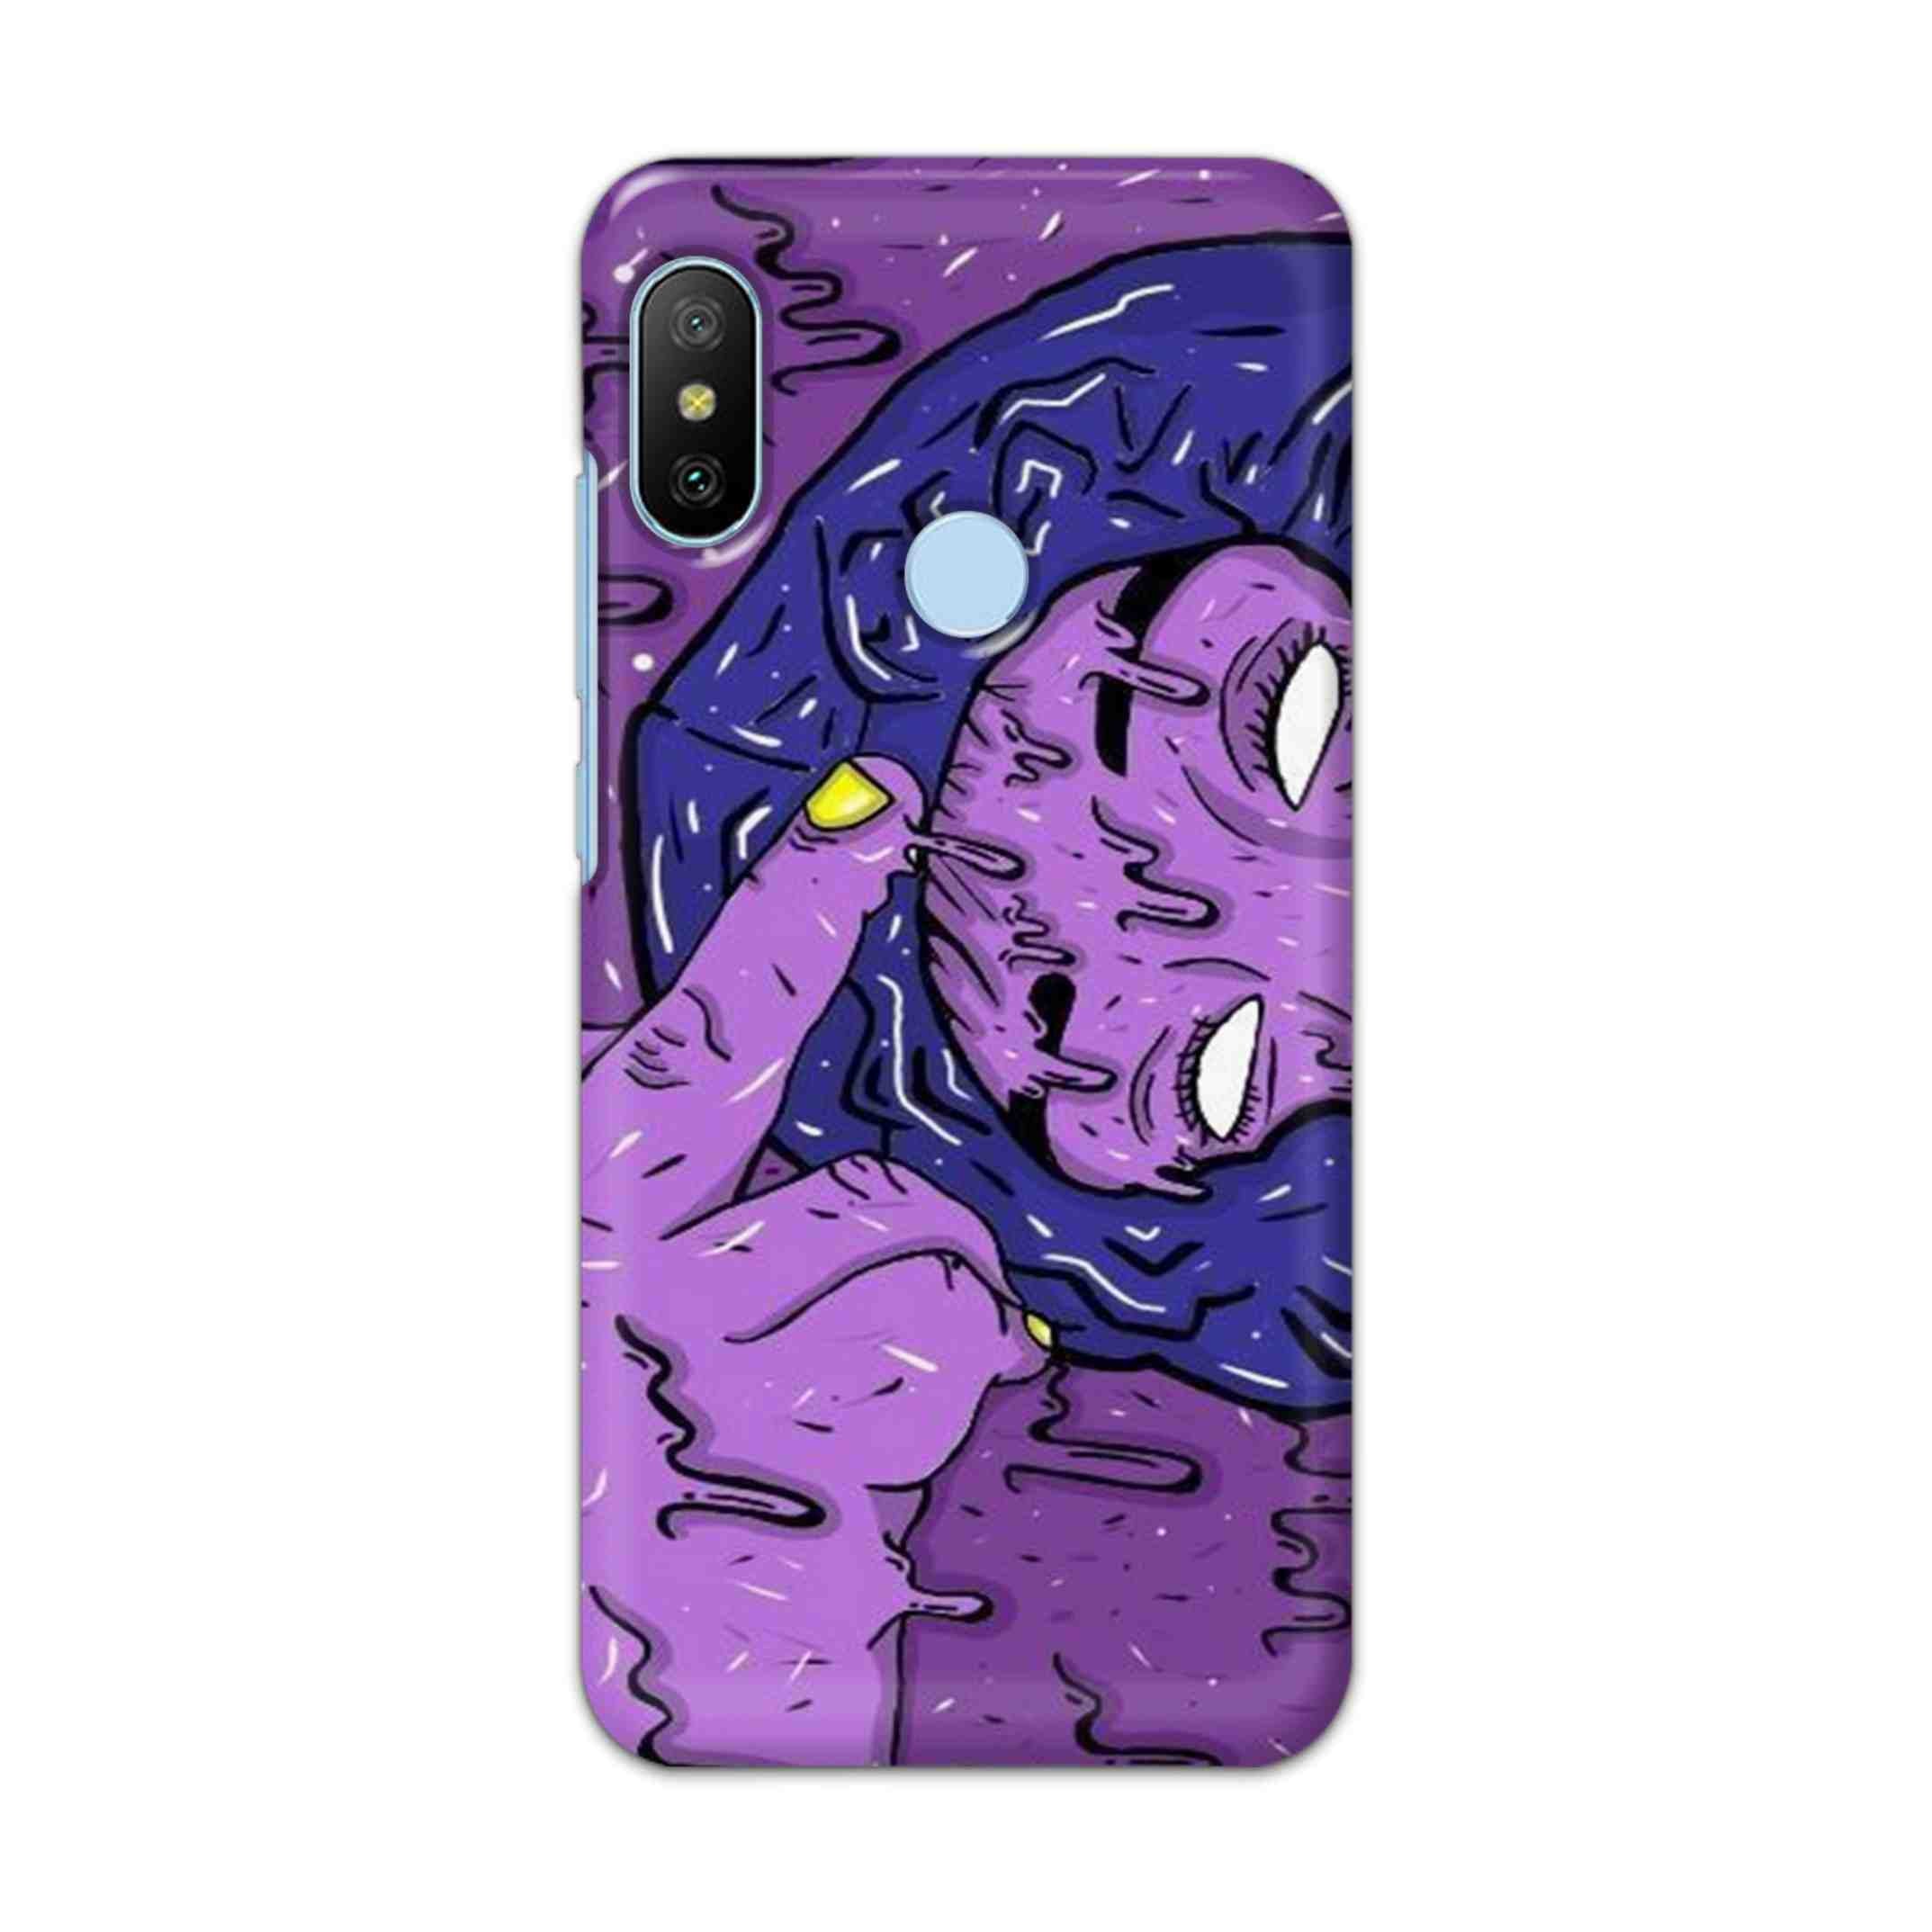 Buy Dashing Art Hard Back Mobile Phone Case/Cover For Xiaomi Redmi 6 Pro Online